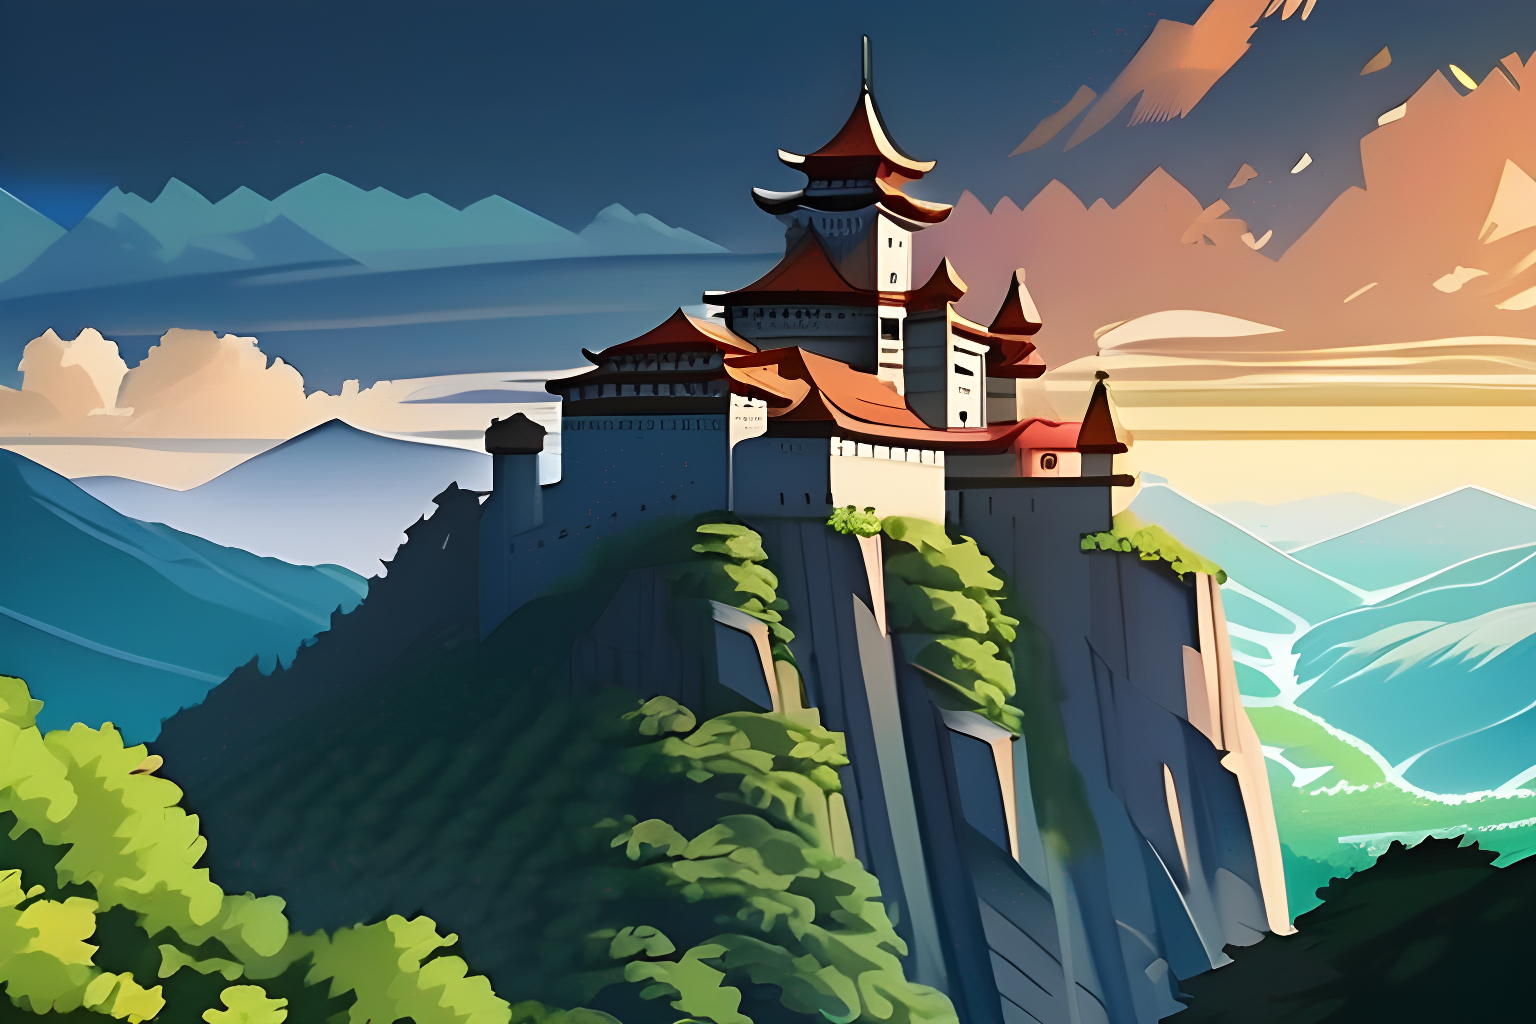 An impregnable fortress in mountains for ultimate safety in anime style